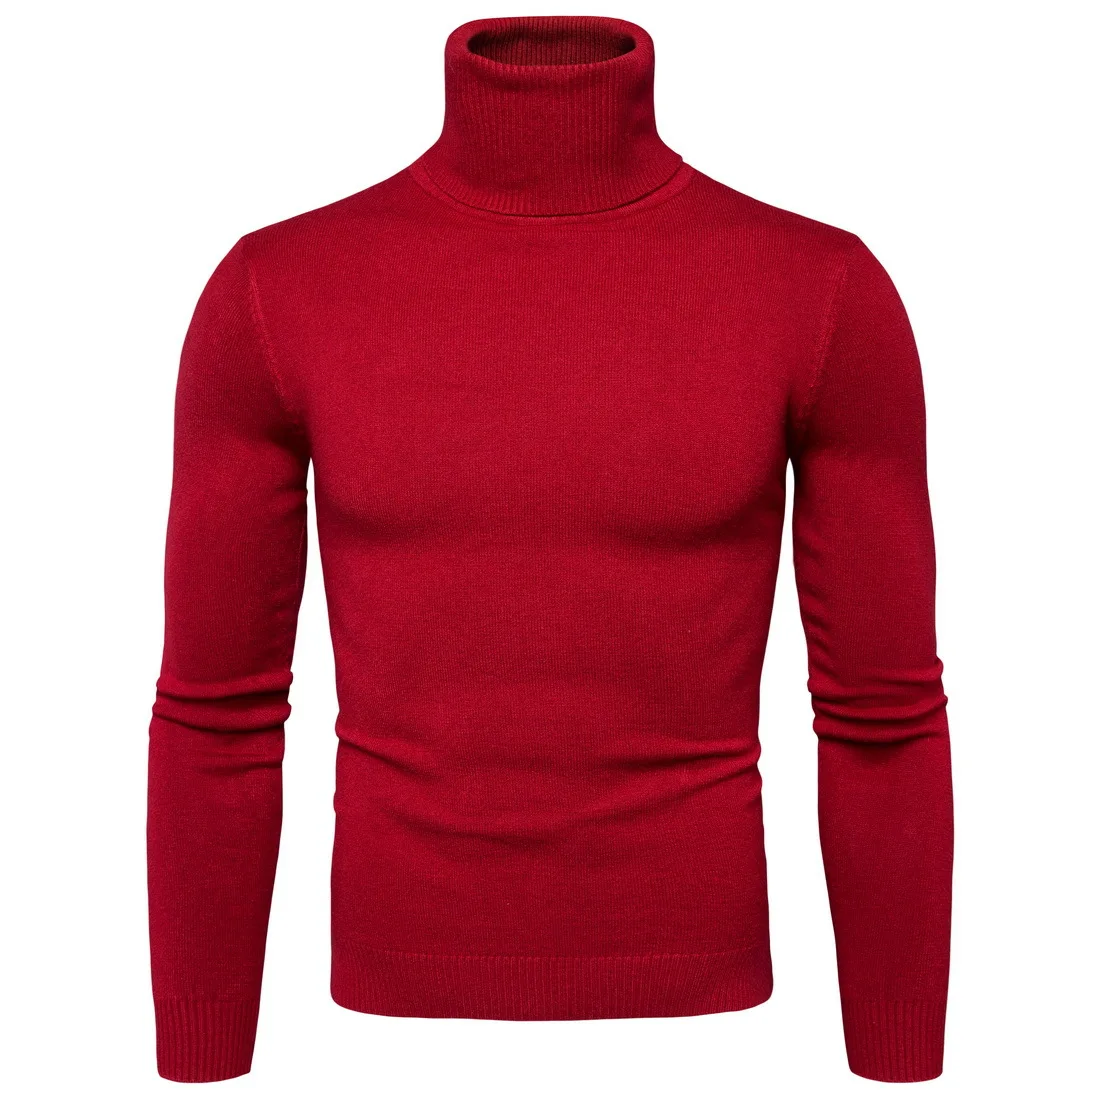 Basic Pullovers Sweater Men Casual Cotton Man O-neck Knitted Sweaters